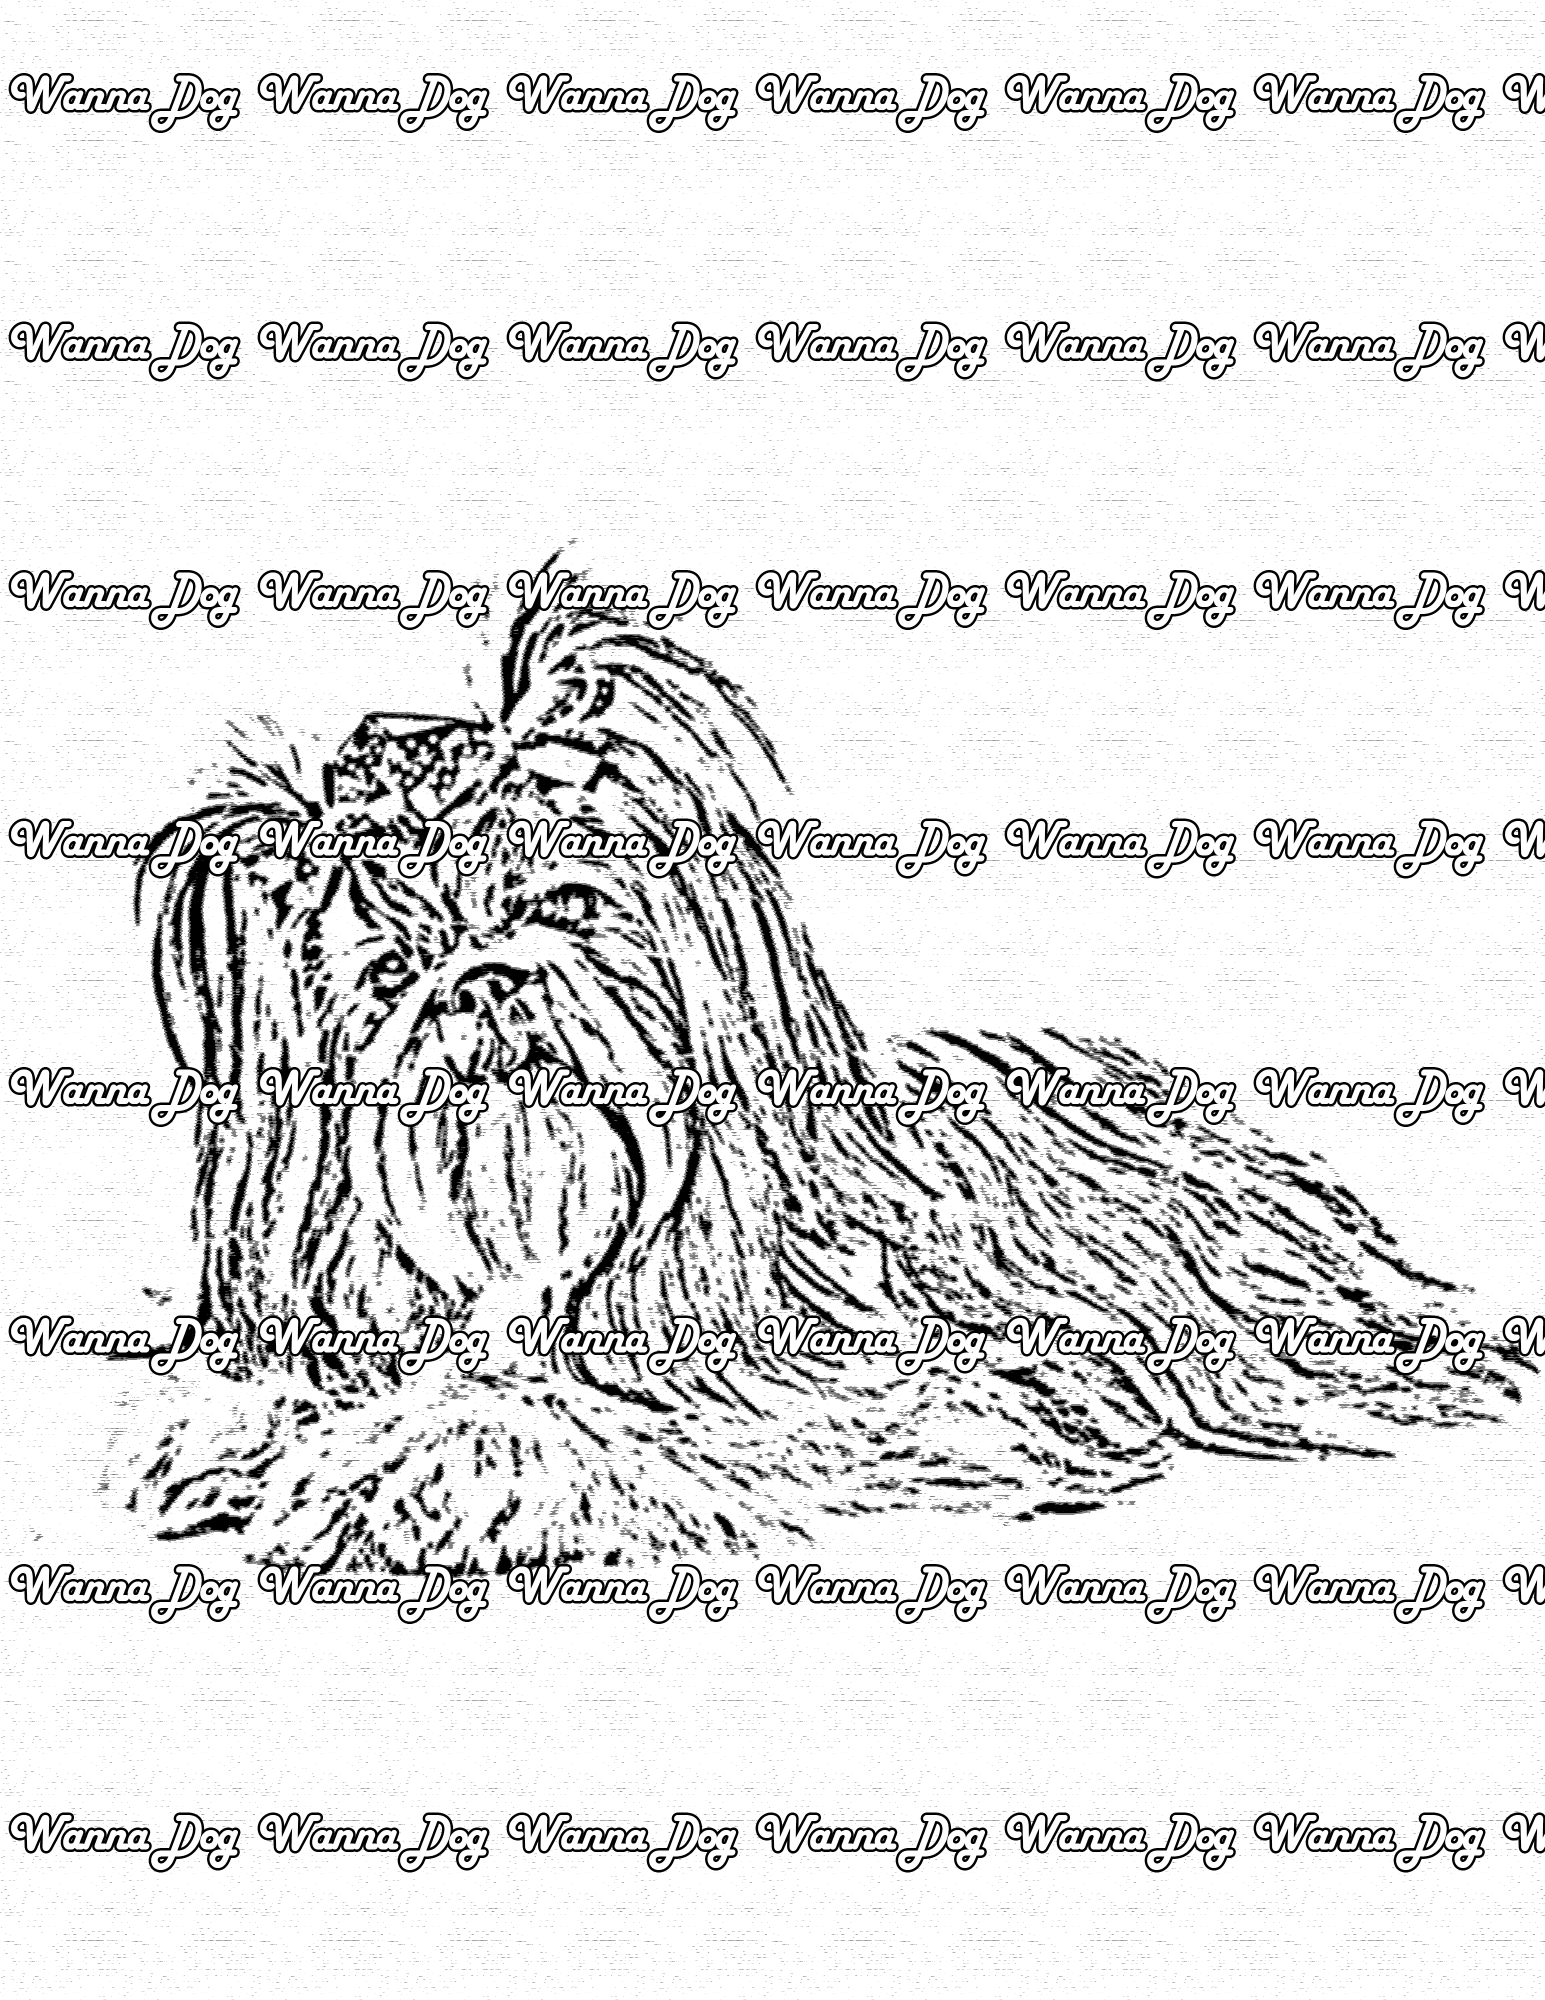 Shih Tzu Coloring Page of a Shih Tzu sitting and posing for the camera